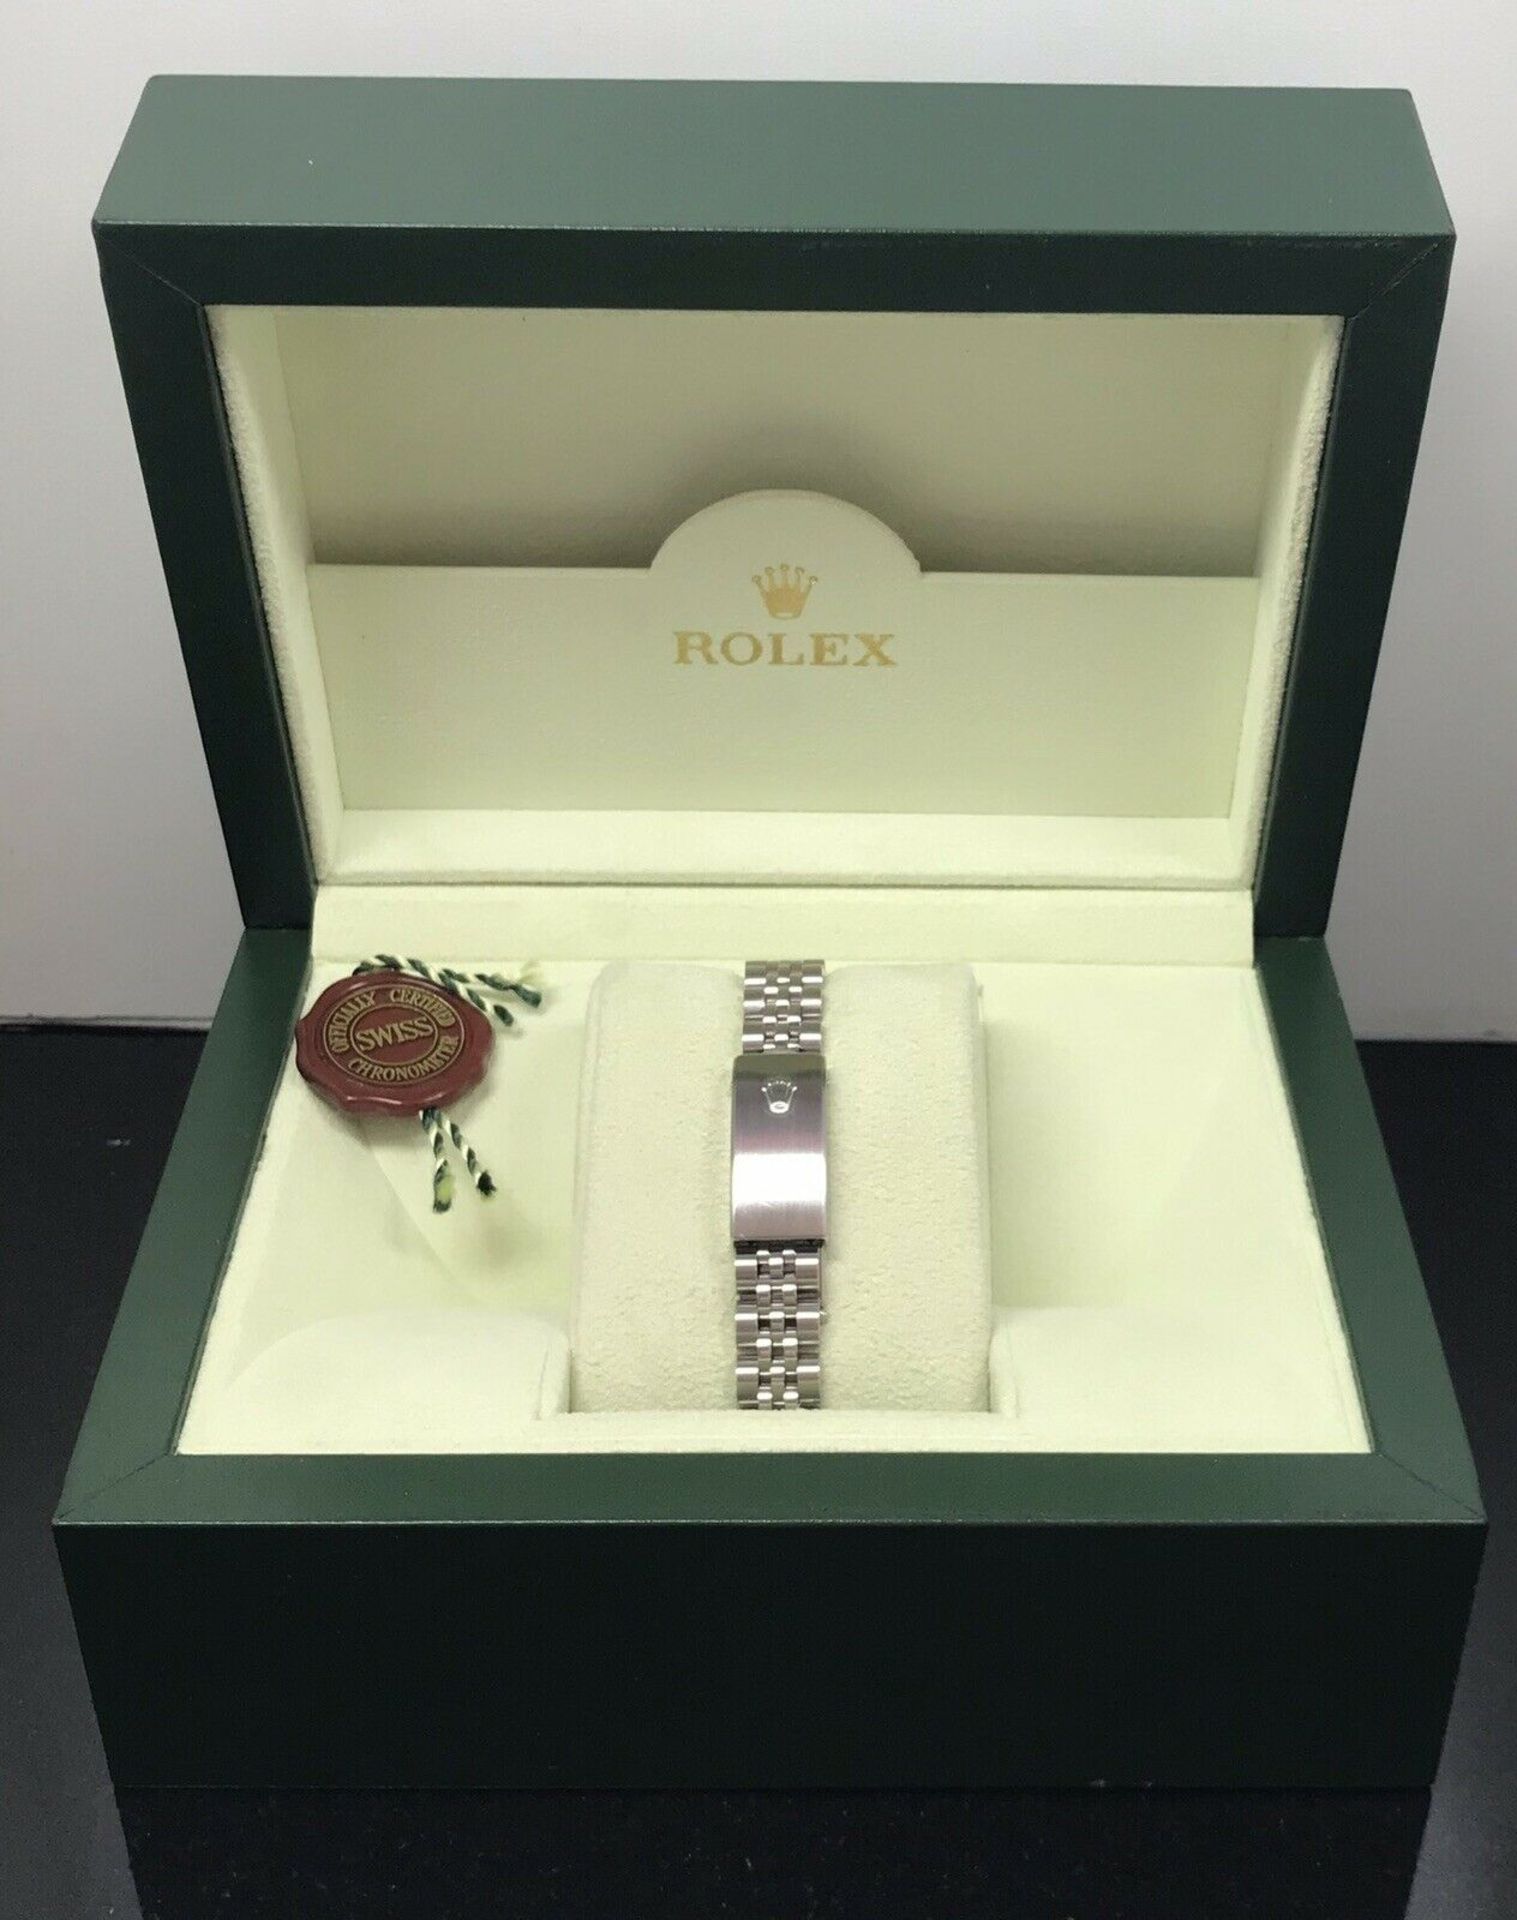 2005 Ladies Rolex Date 79240 Stainless Steel - Image 9 of 11